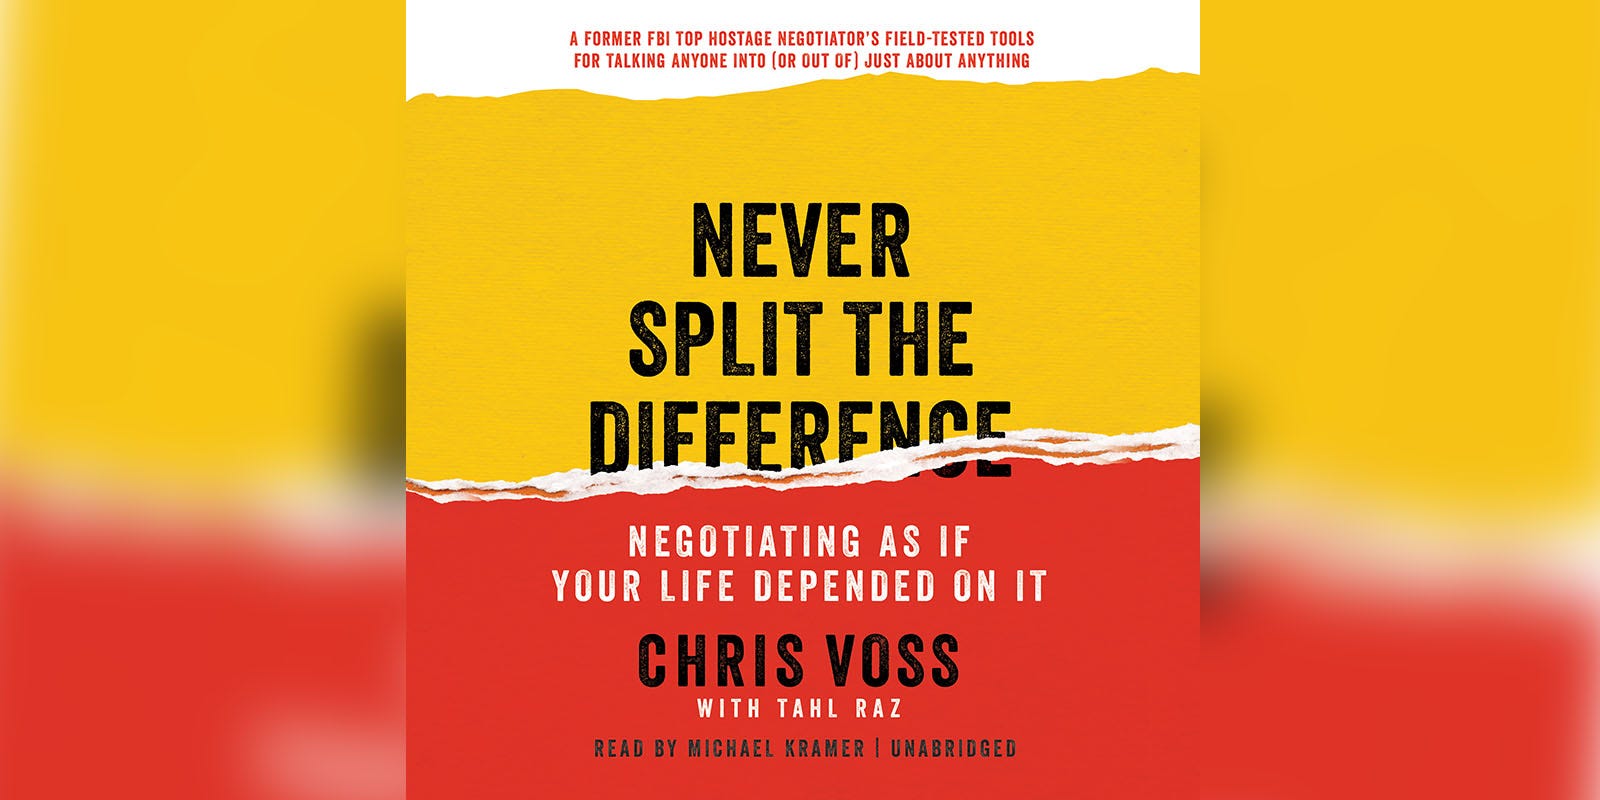 Chris Voss  Negotiate as If Your Life Depended on It